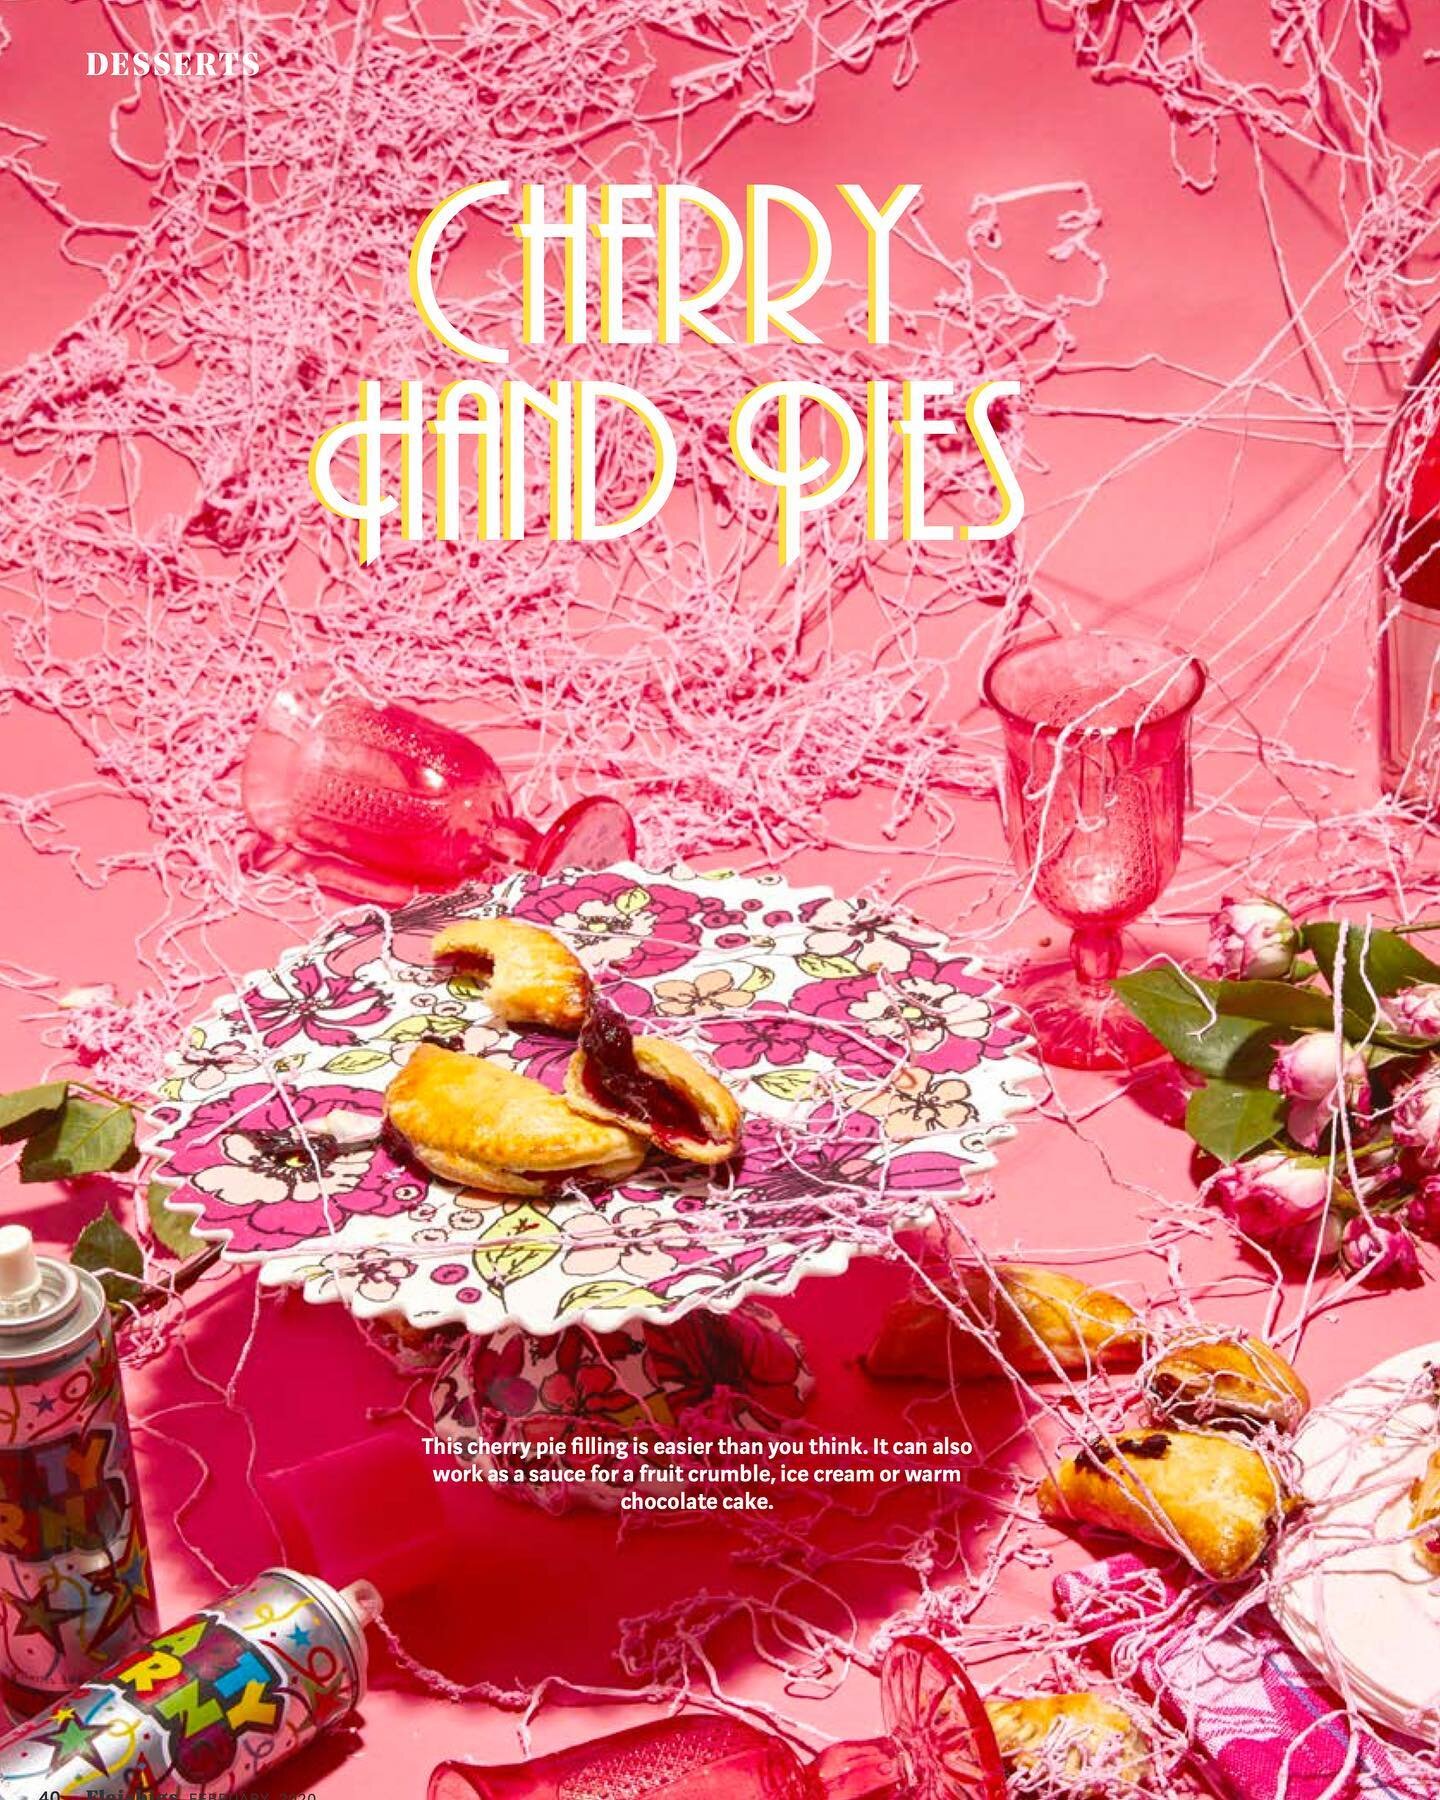 Let&rsquo;s have the cherry hand pies🍒
-
-
Shot for @fleishigsmag Issue 015
Editor in Chief/Stylist: @shifraklein
-
-
#fleishigs #fleishigsmag #food #foodie #foodphotography #foodmagazine #tearsheet #eeeeeats #foodbloggerpro #flashesofdelight #lifei